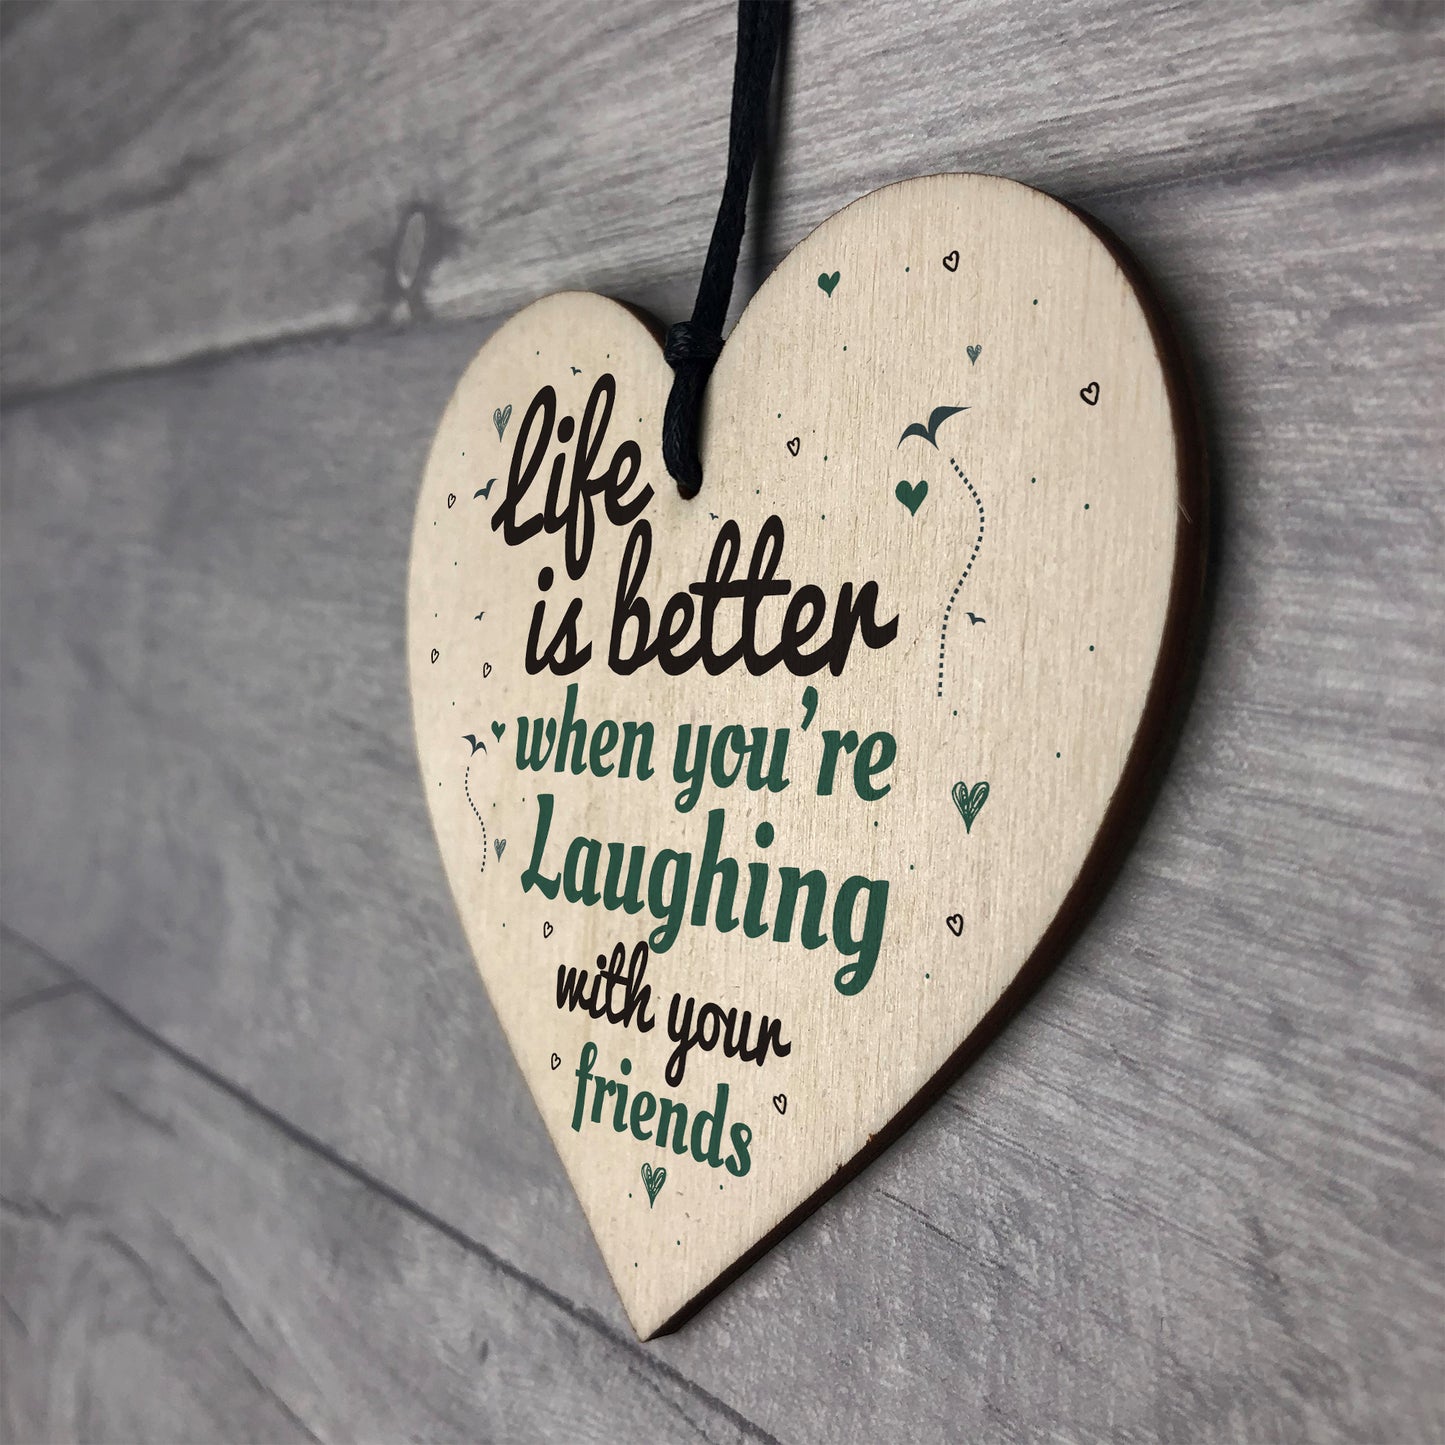 Laugh With Friends Sign Best Friend Plaque Heart Birthday Gifts